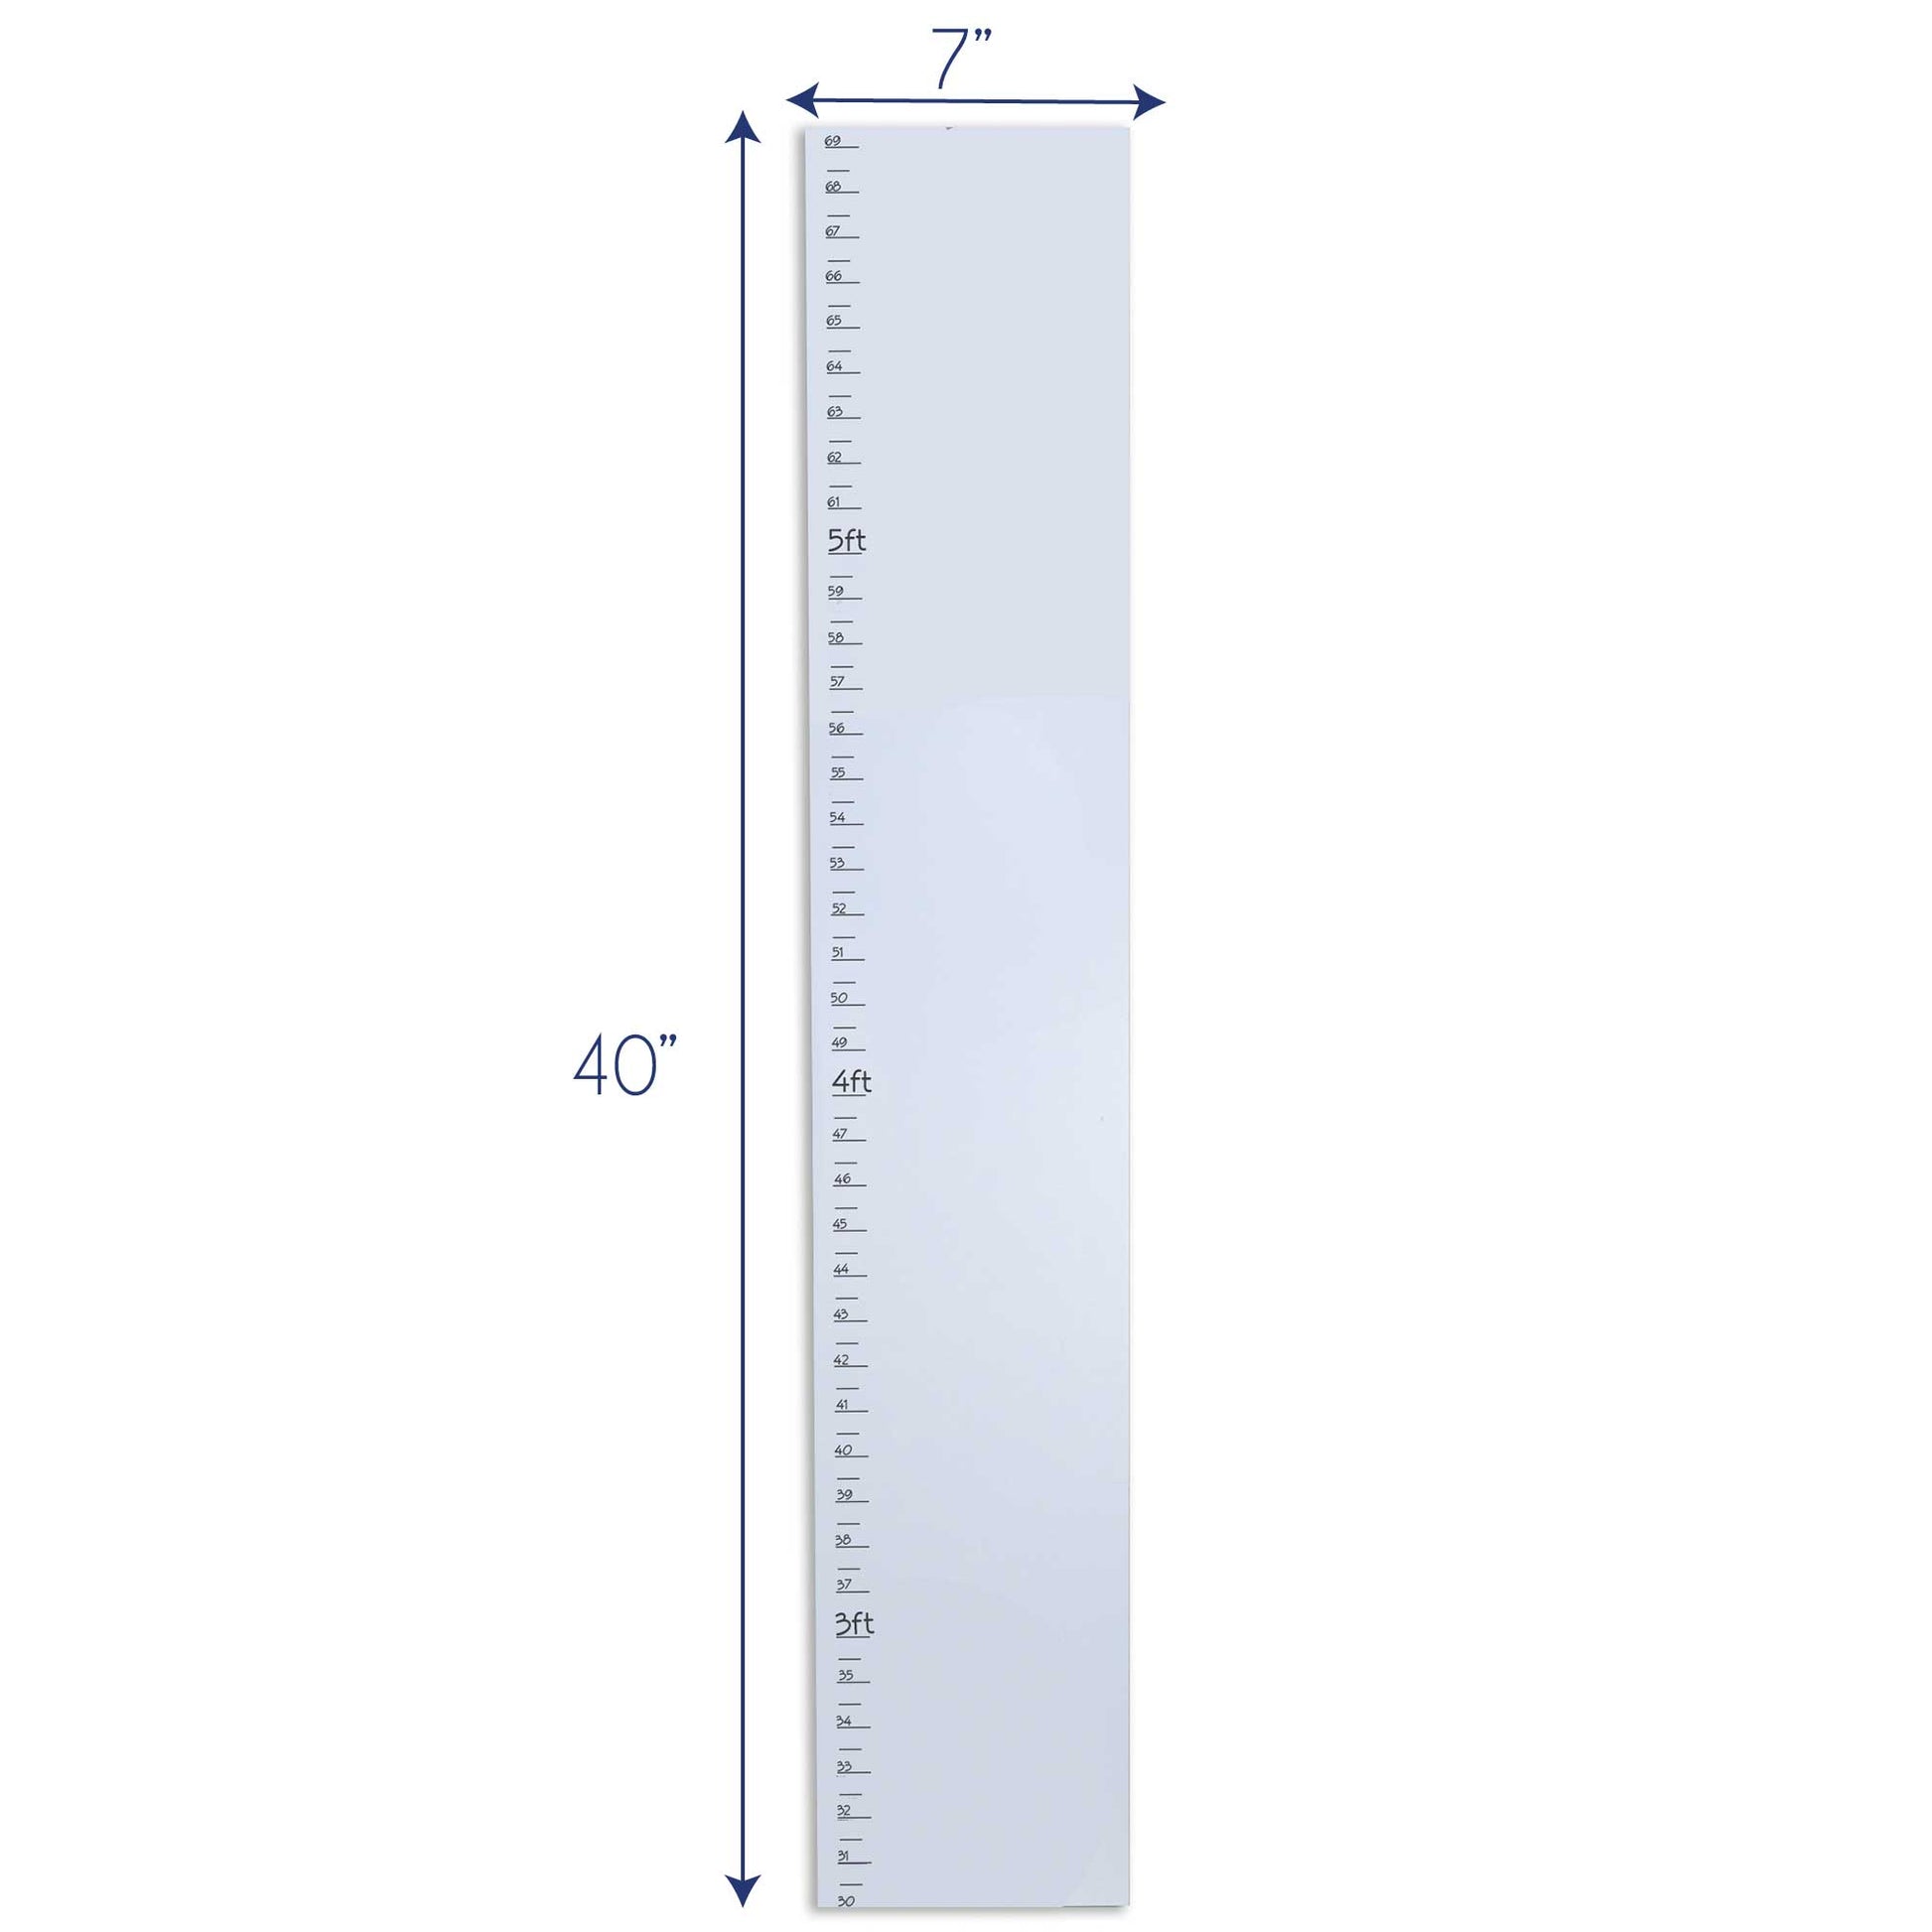 Personalized White Growth Chart With Police Design